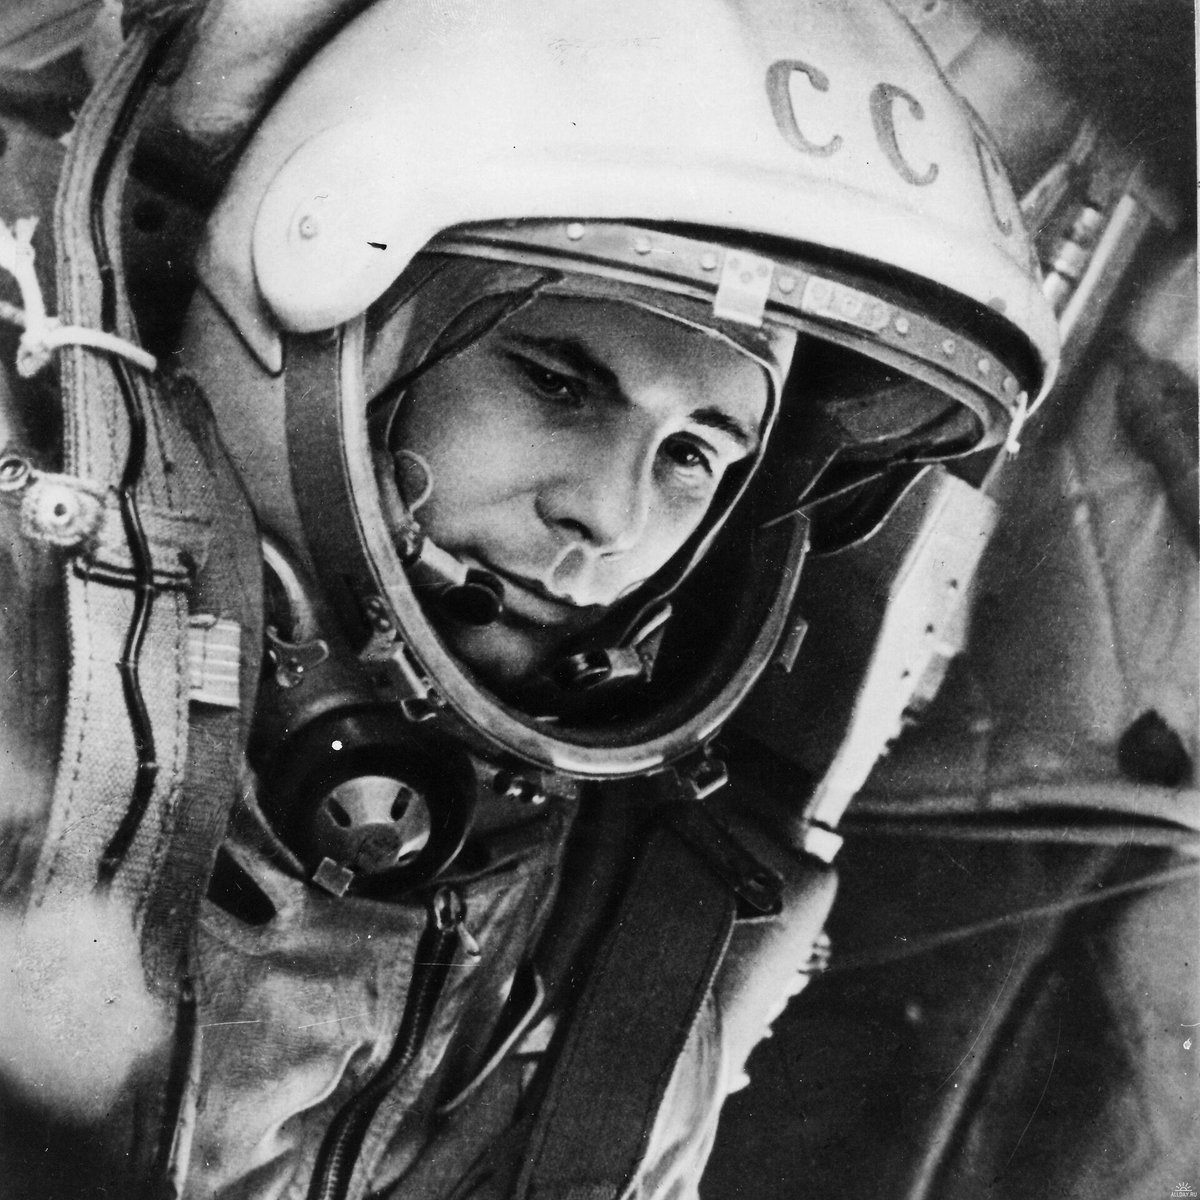 SIXTY YEARS OF HUMANS IN SPACE:

#OTD 12 April 1961, Yuri Gagarin became the first human in space. Many of you are now applying to follow in his footsteps in our ESA #AstronautSelection 👉 esa.int/About_Us/ESA_h… @YurisNight #YourWayToSpace #InternationalDayofHumanSpaceflight